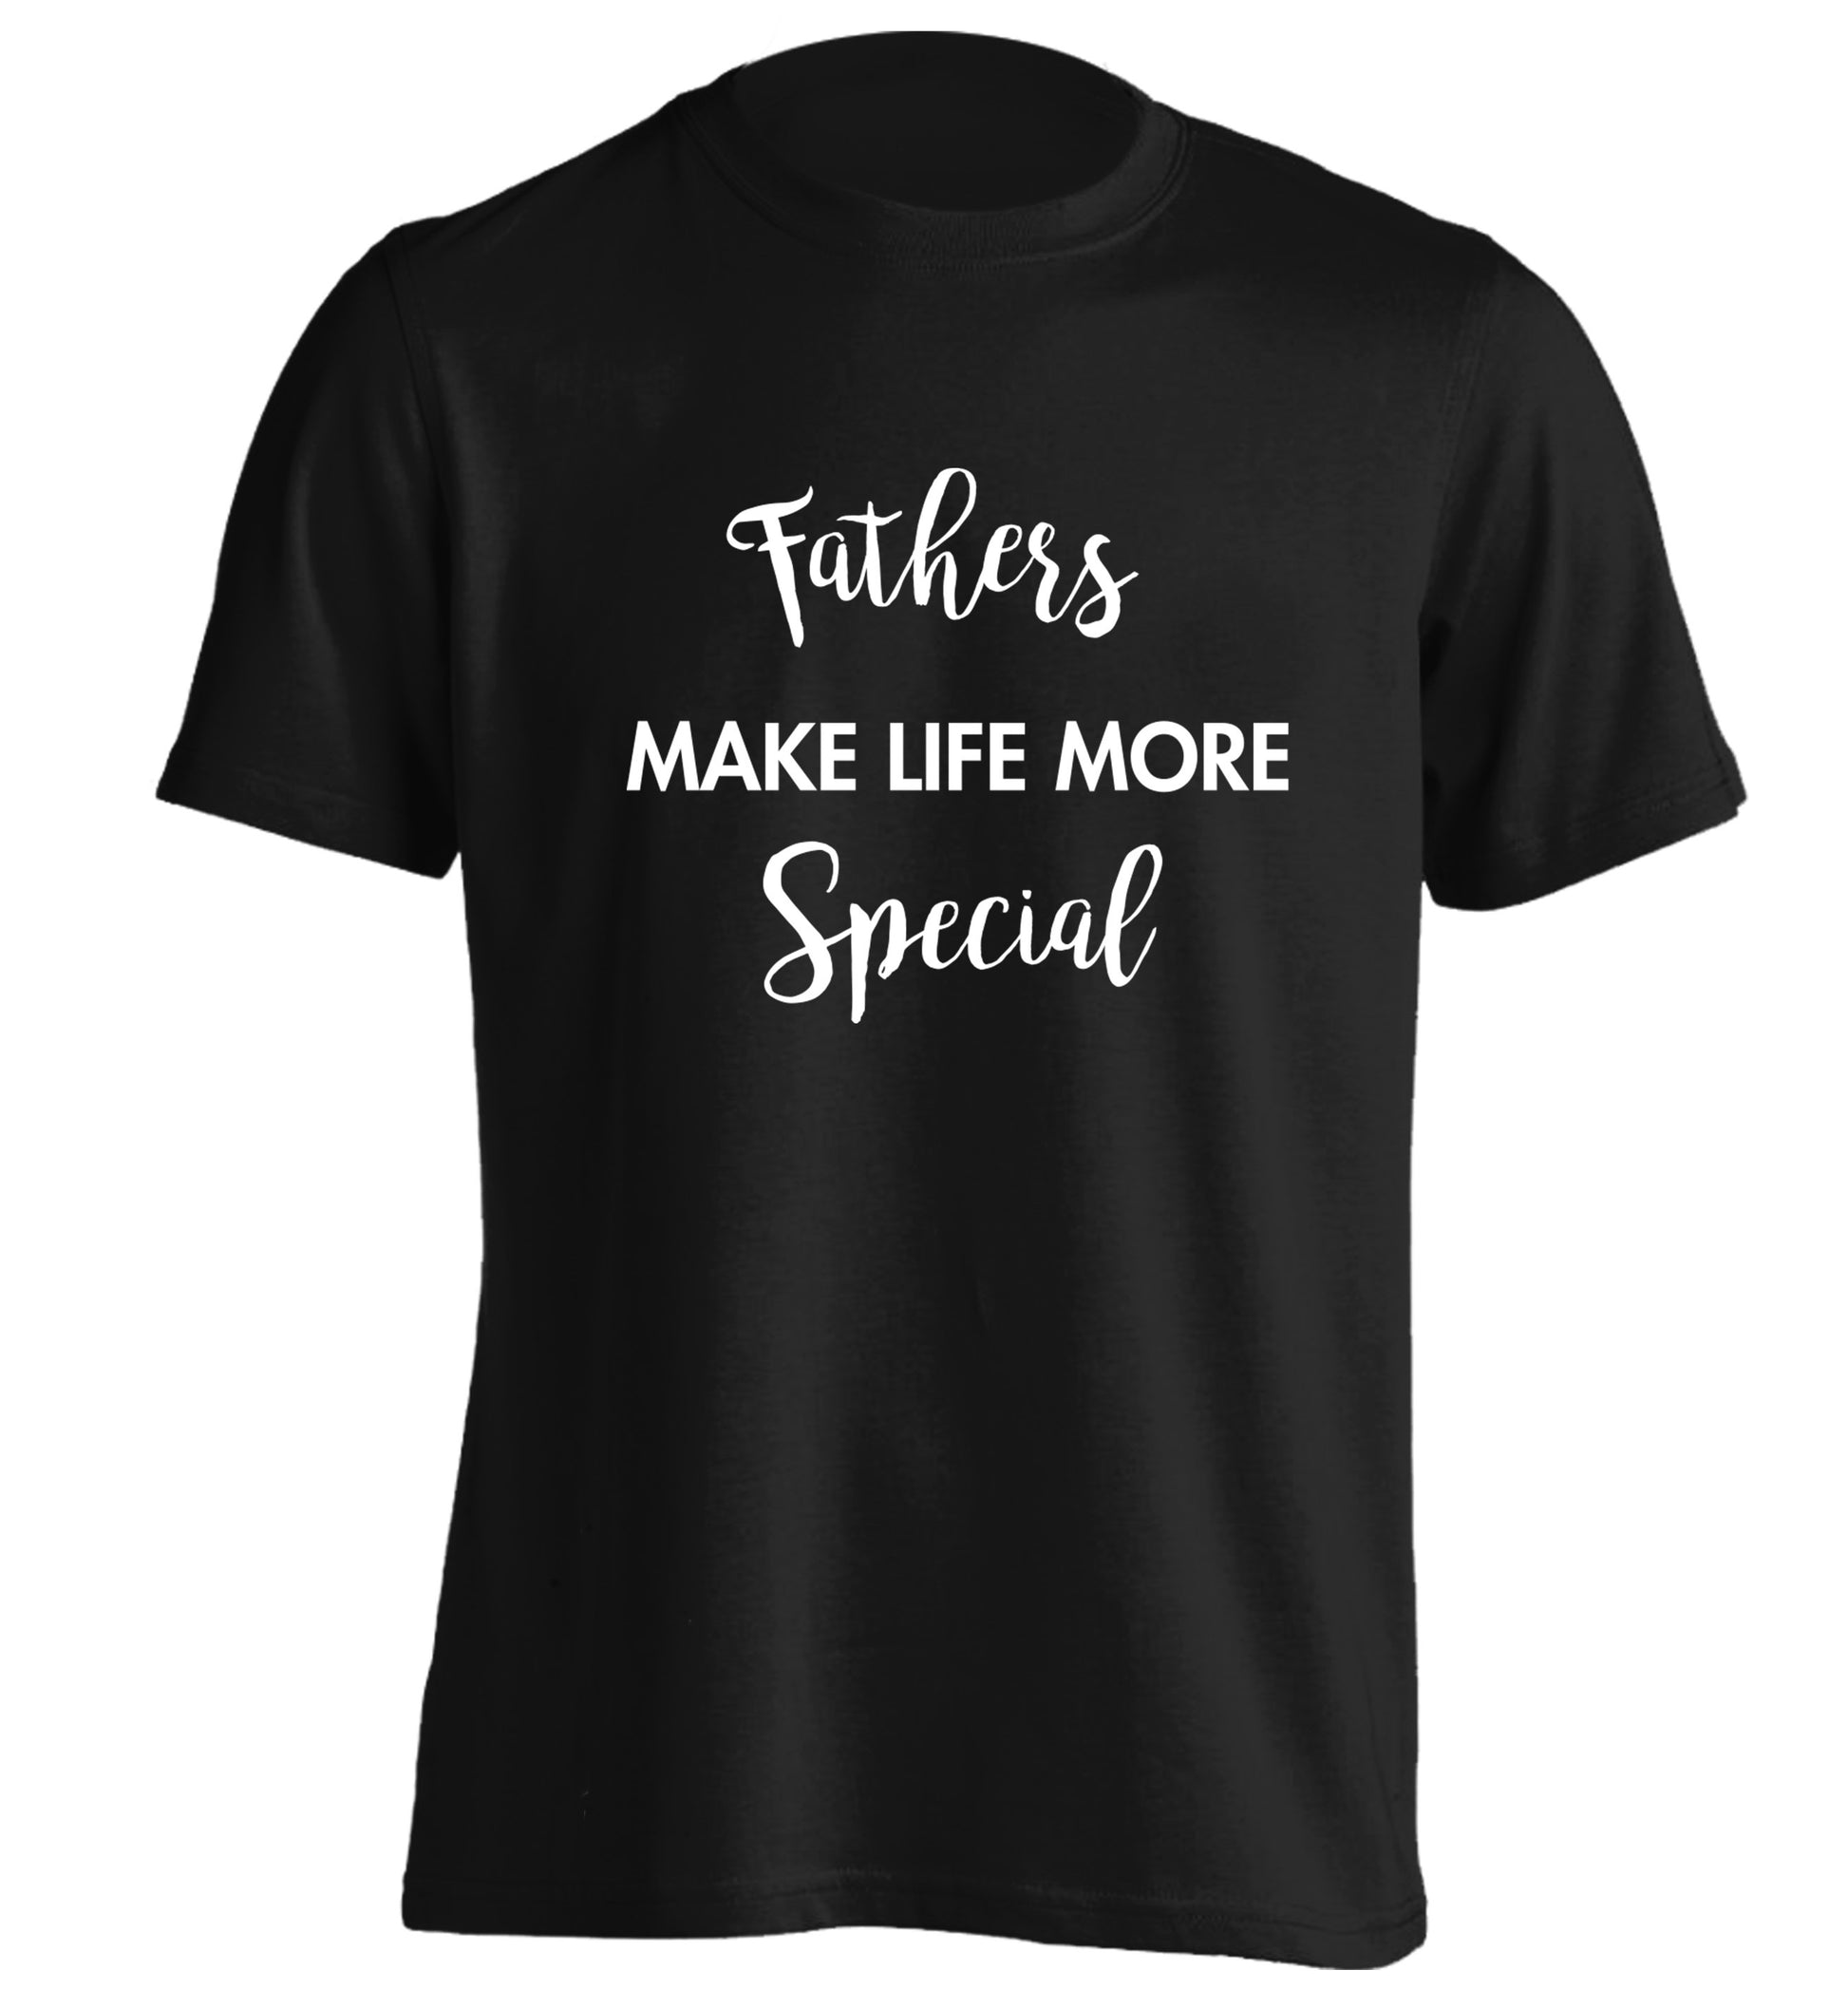 Fathers make life more special adults unisex black Tshirt 2XL